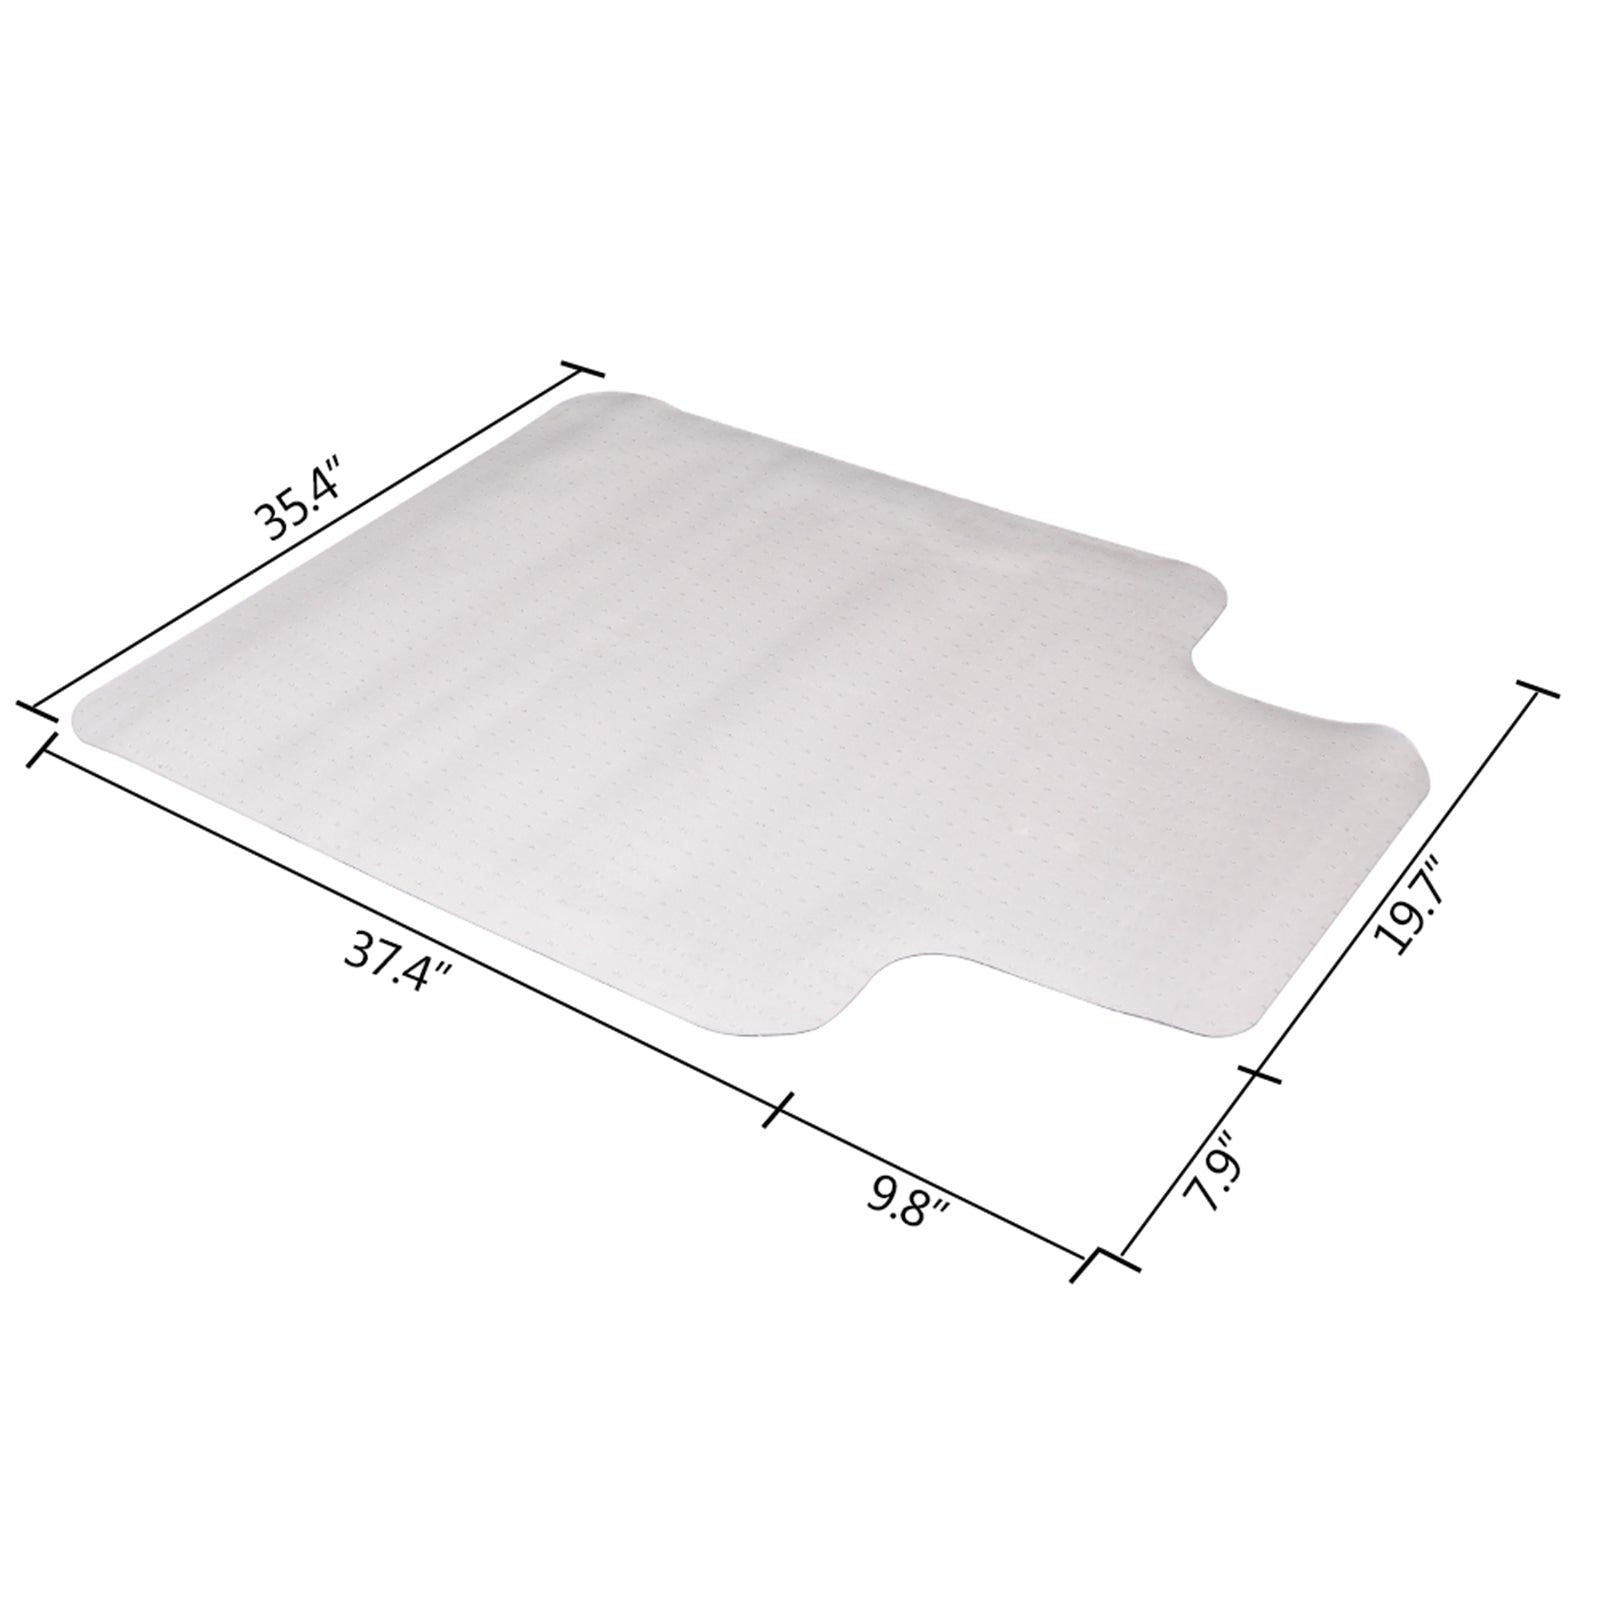 SUGIFT 36 x 48 inch Home Floor Chair Transparent Protective Pad, White PVC Floor Mat